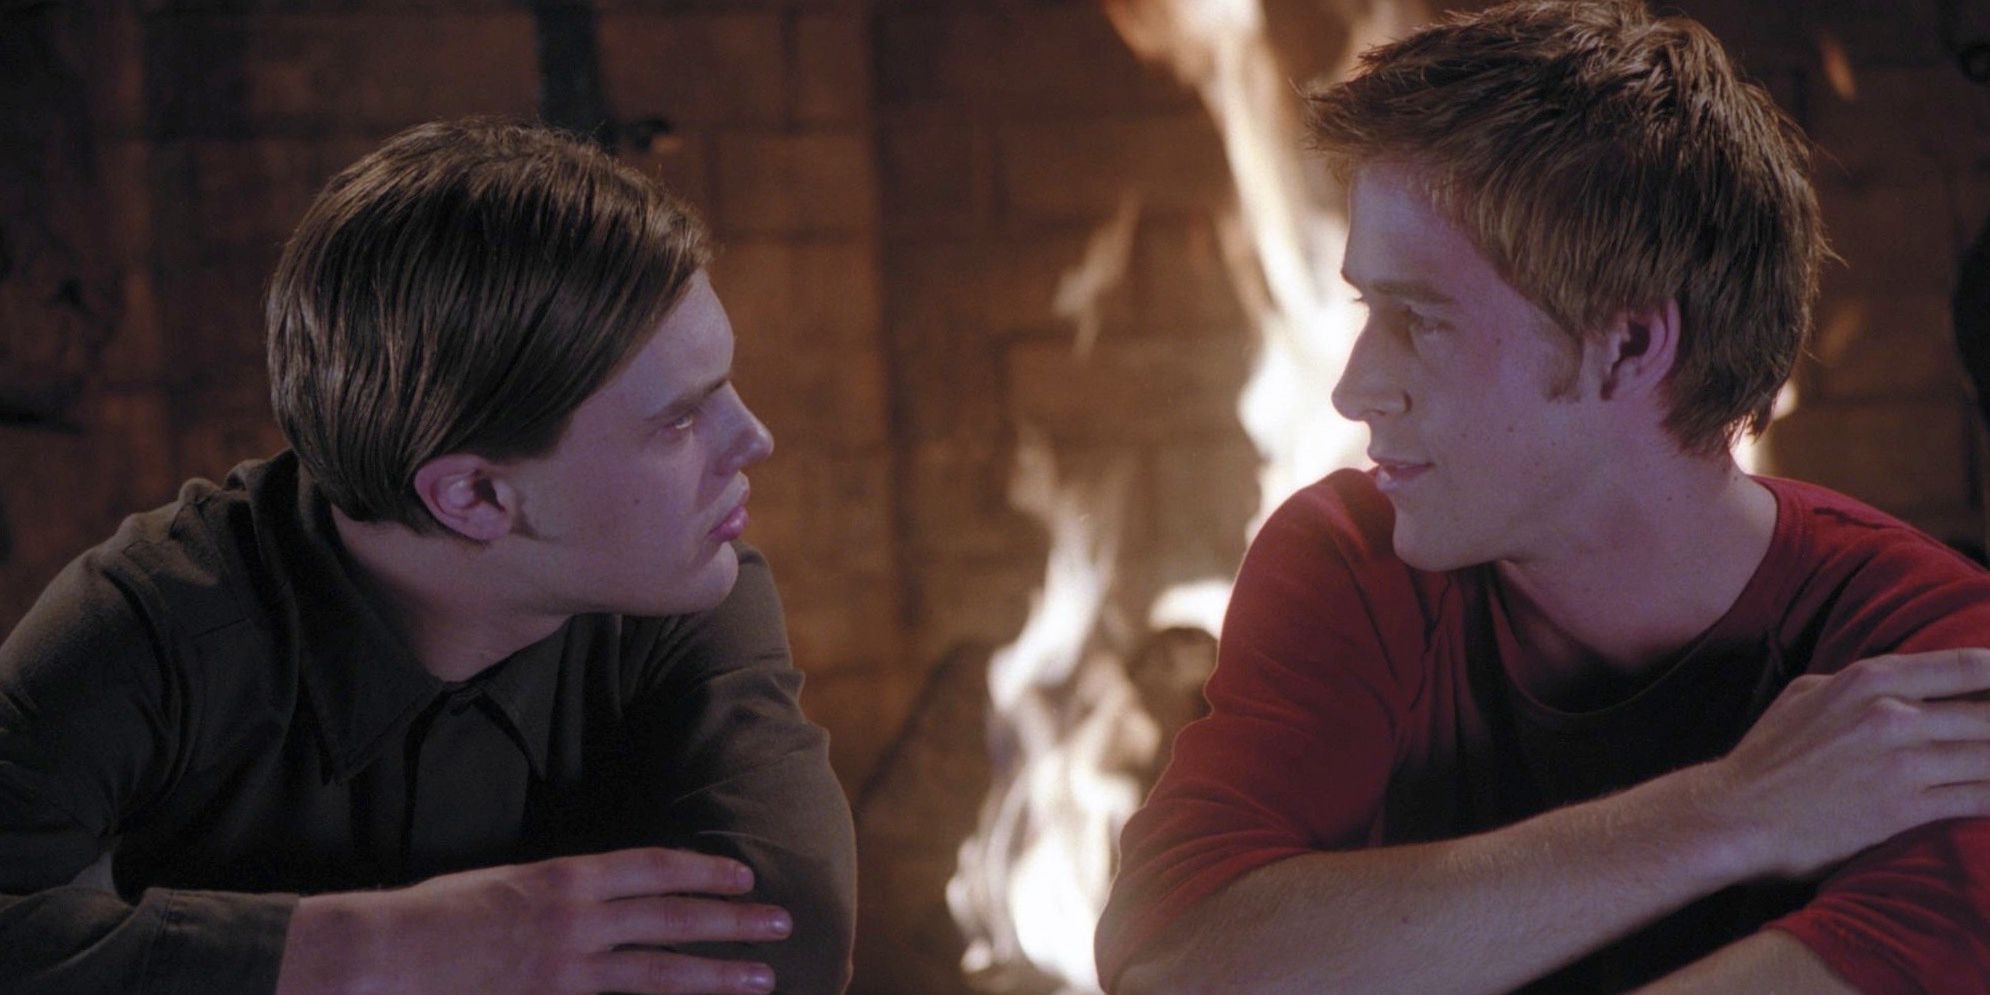 Richard Haywood (Ryan Gosling) and Justin Pendleton (Michael Pitt) talking to each other in front of a fire in Murder by Numbers.